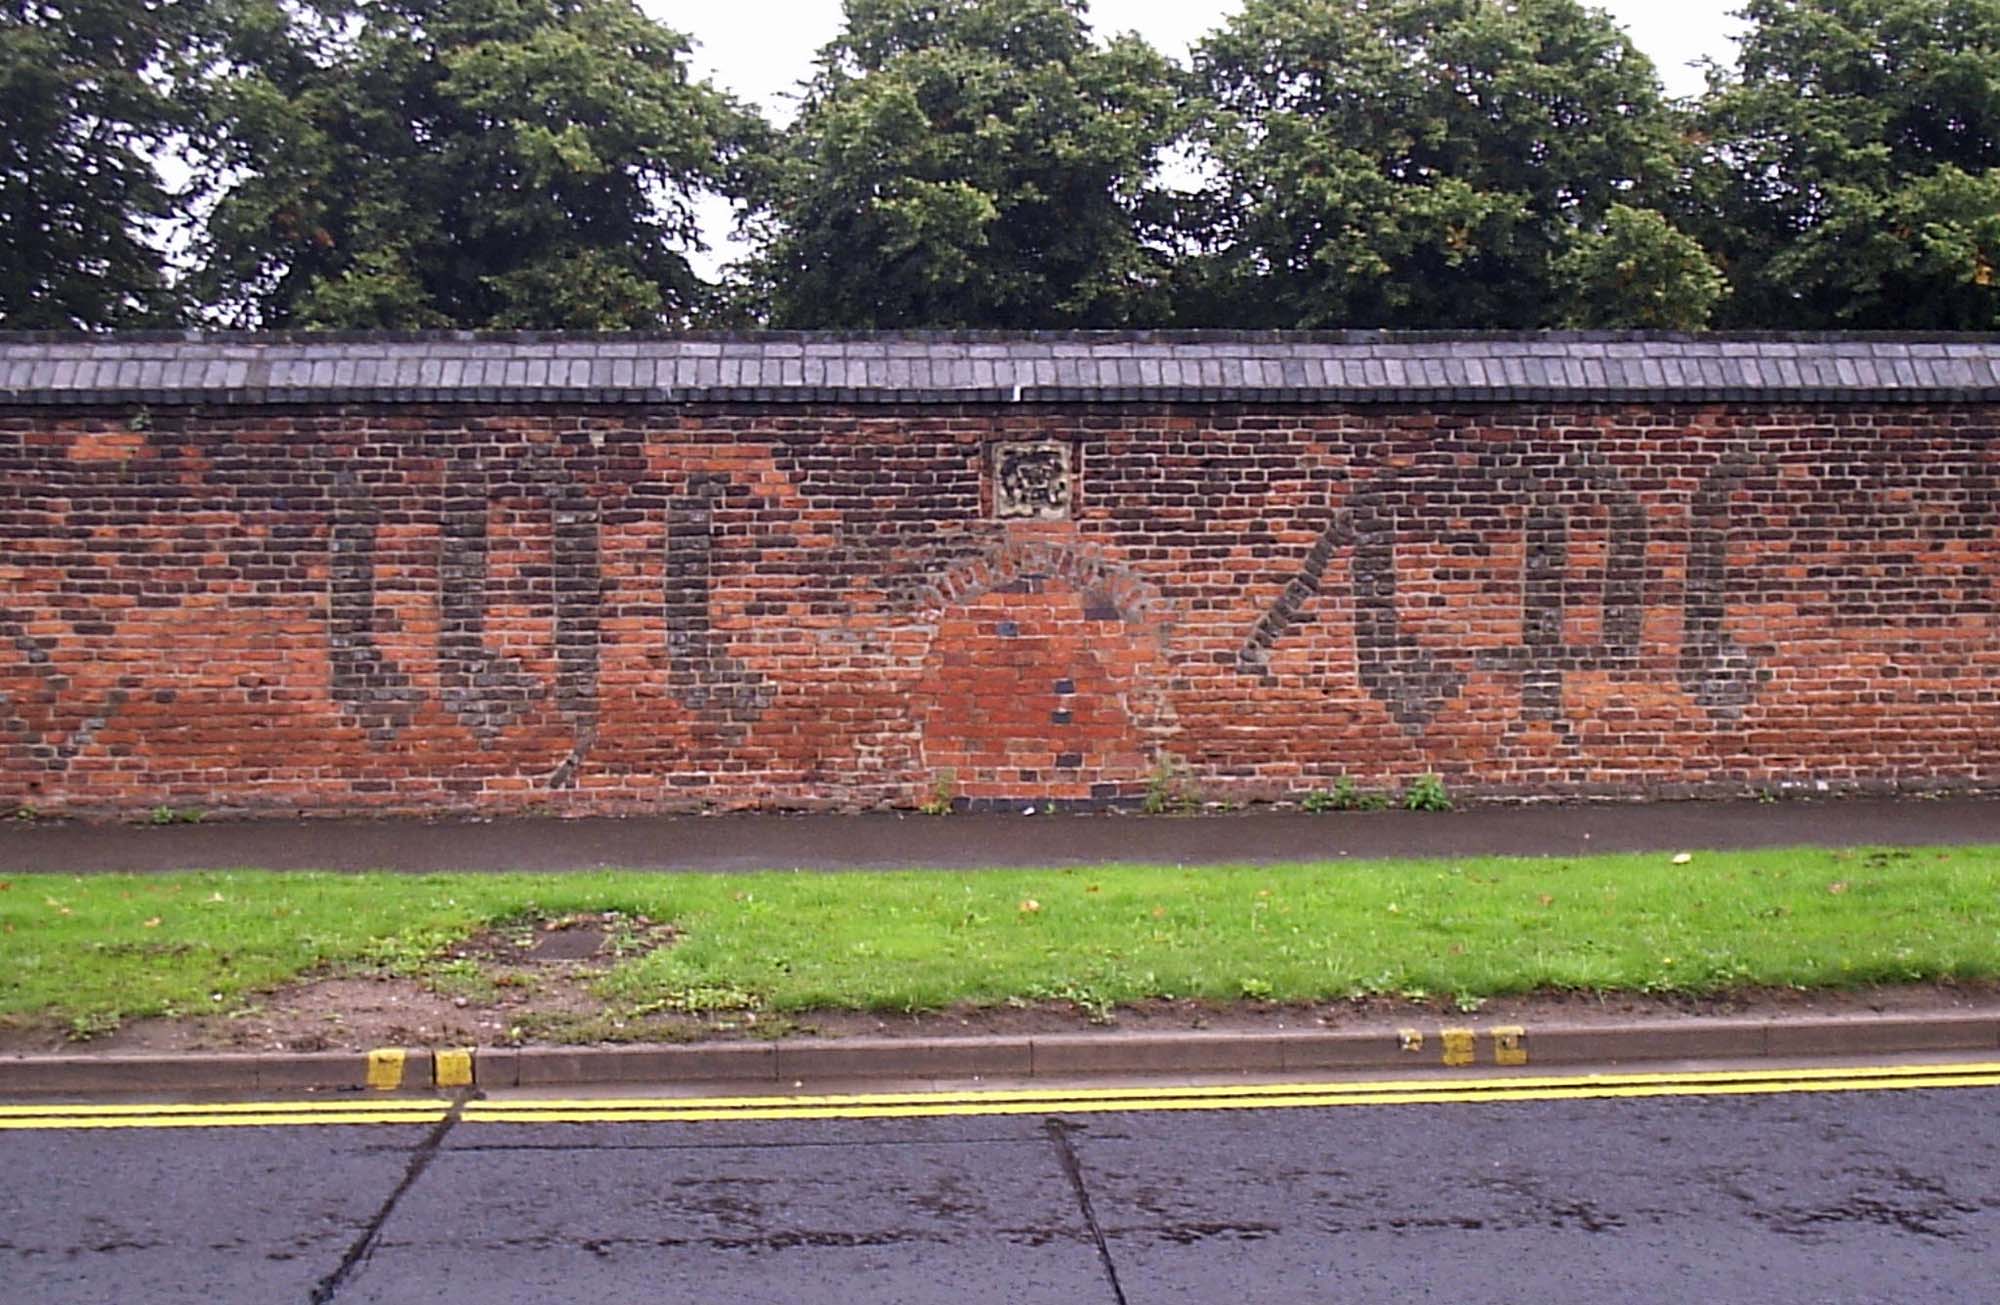 Abbot Penny’s wall (c.1500), showing the ‘mr’ and ‘ihc’ symbols in flared headers. This view can be seen from the road on St. Margaret's Way - 